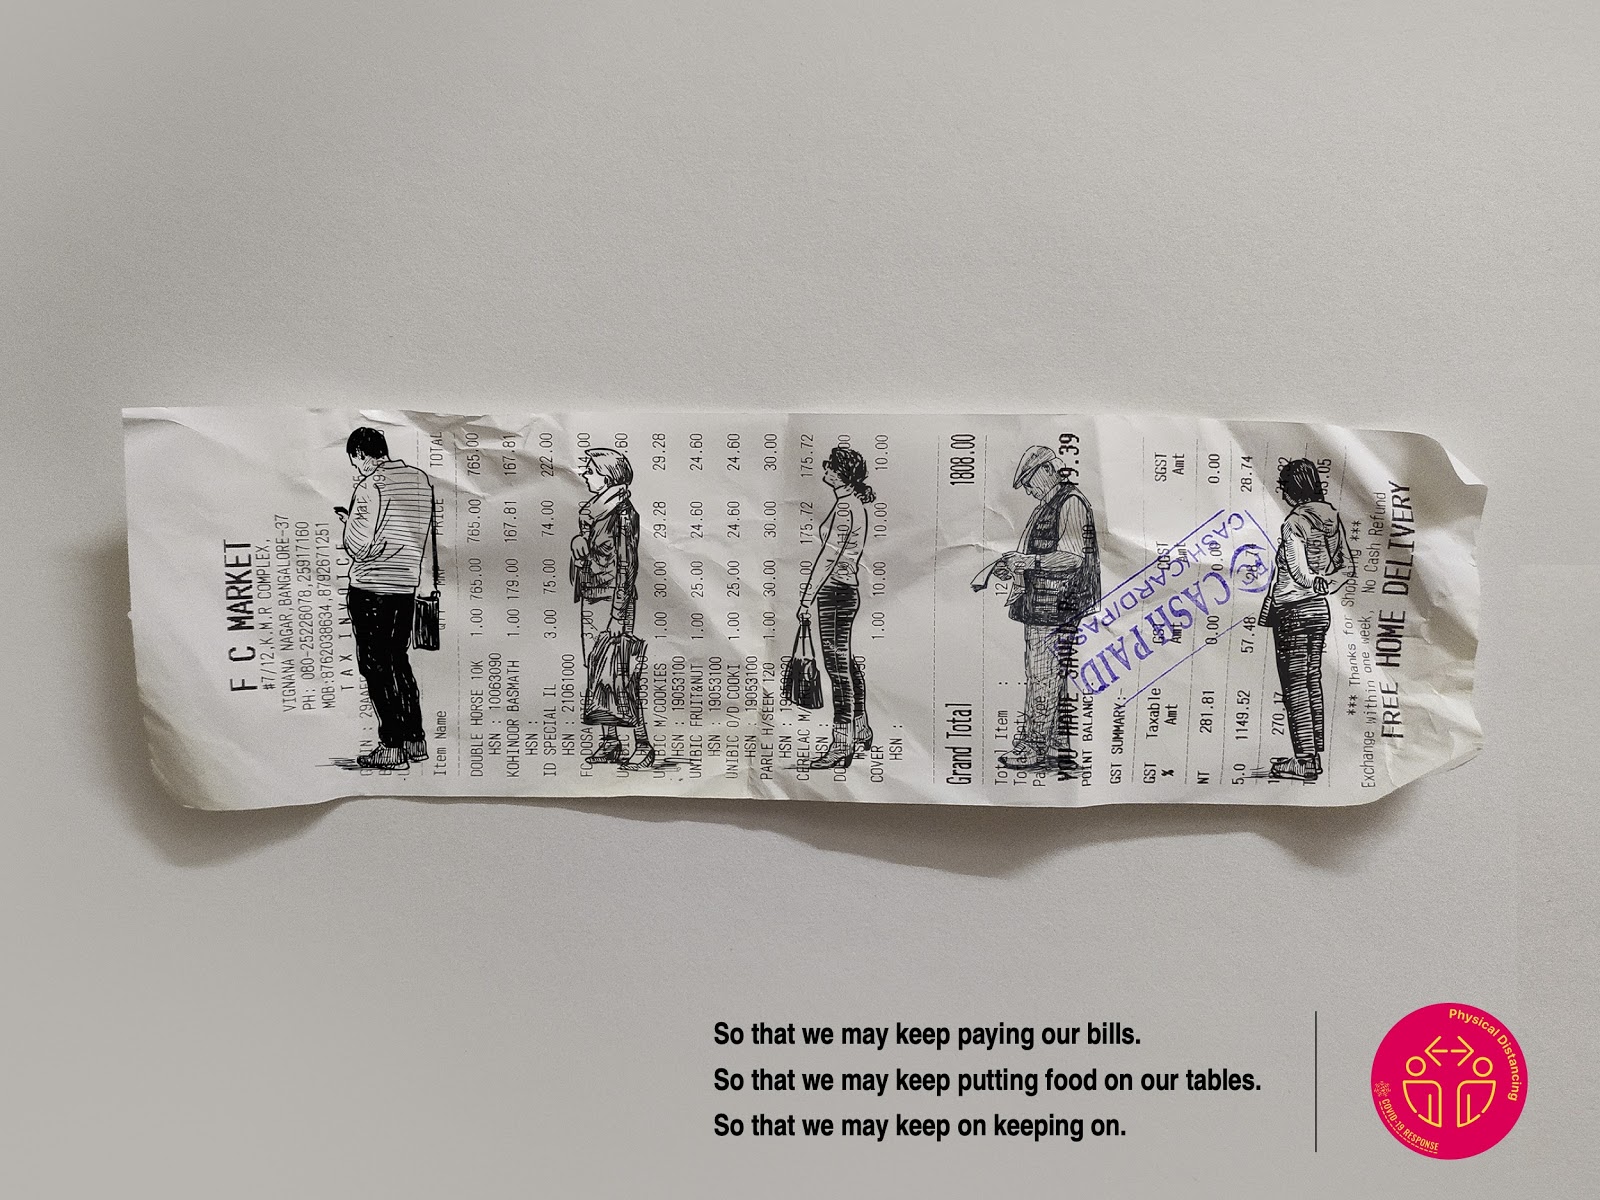 Deepesh PT's submission to the United Nations Covid-19 Global Call Out to Creatives highlights the importance of social distancing with drawings of physically separated people in line, imposed onto a grocery store receipt.